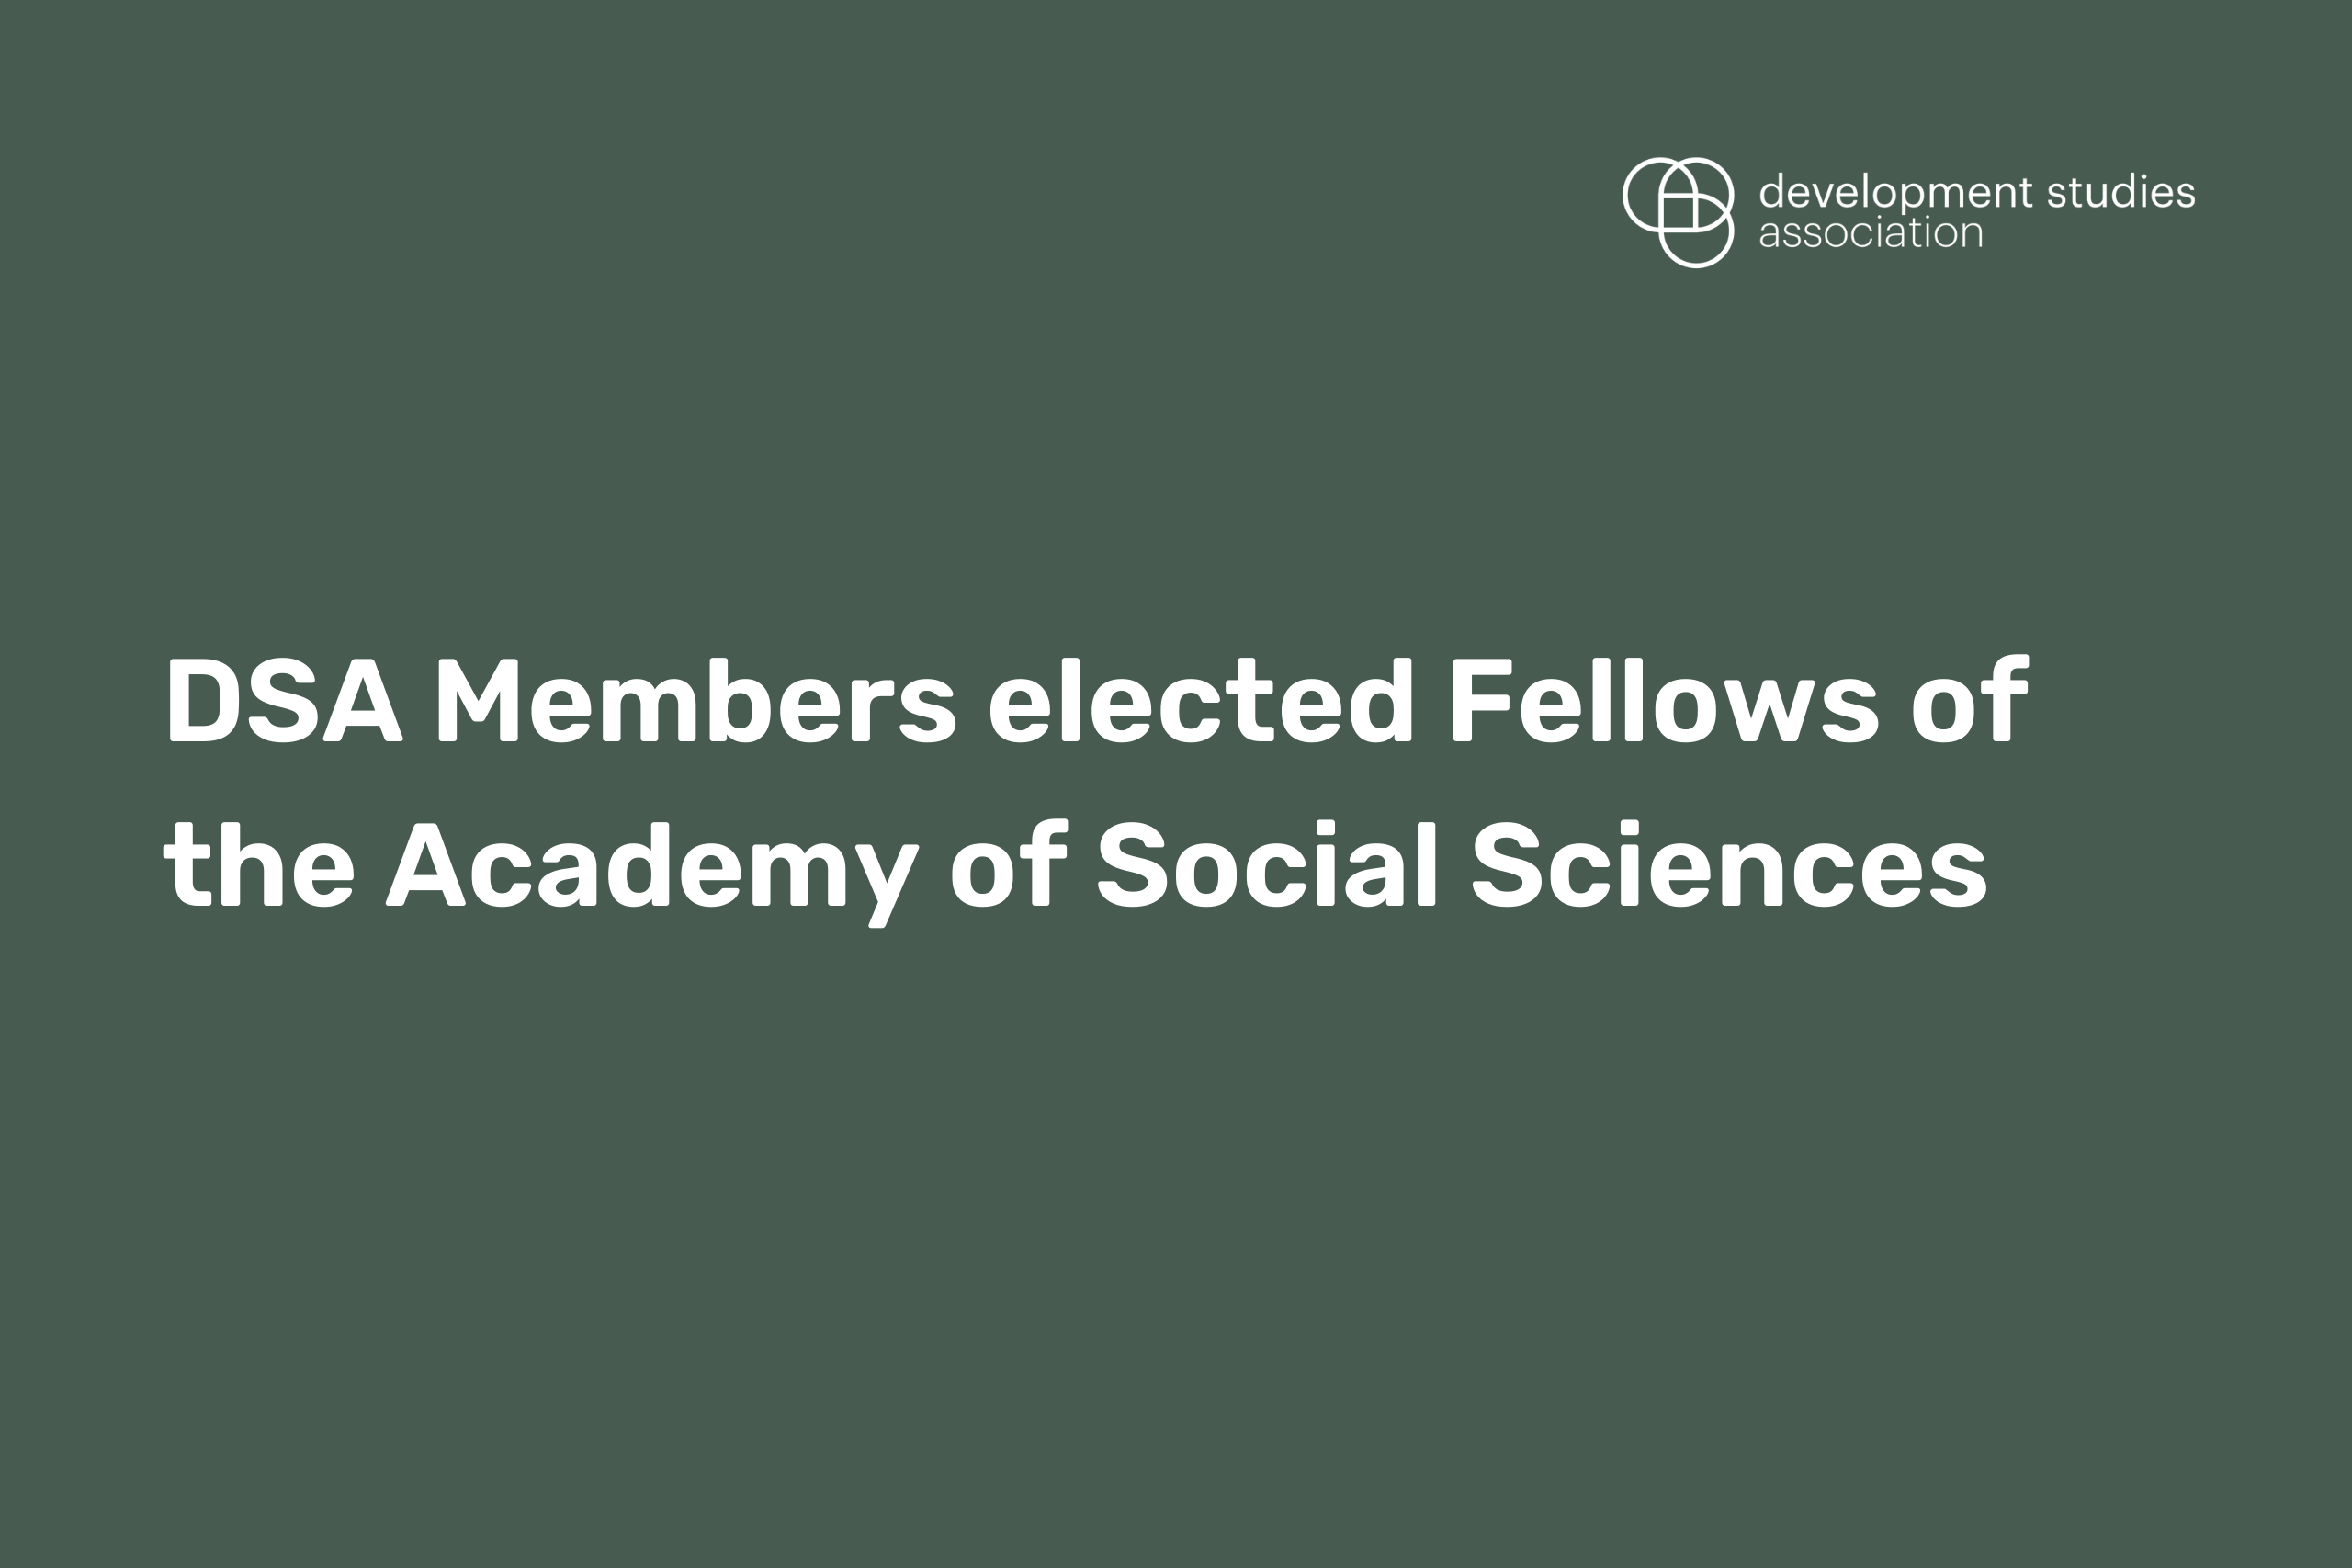 dsa-members-elected-fellows-of-the-academy-of-social-sciences